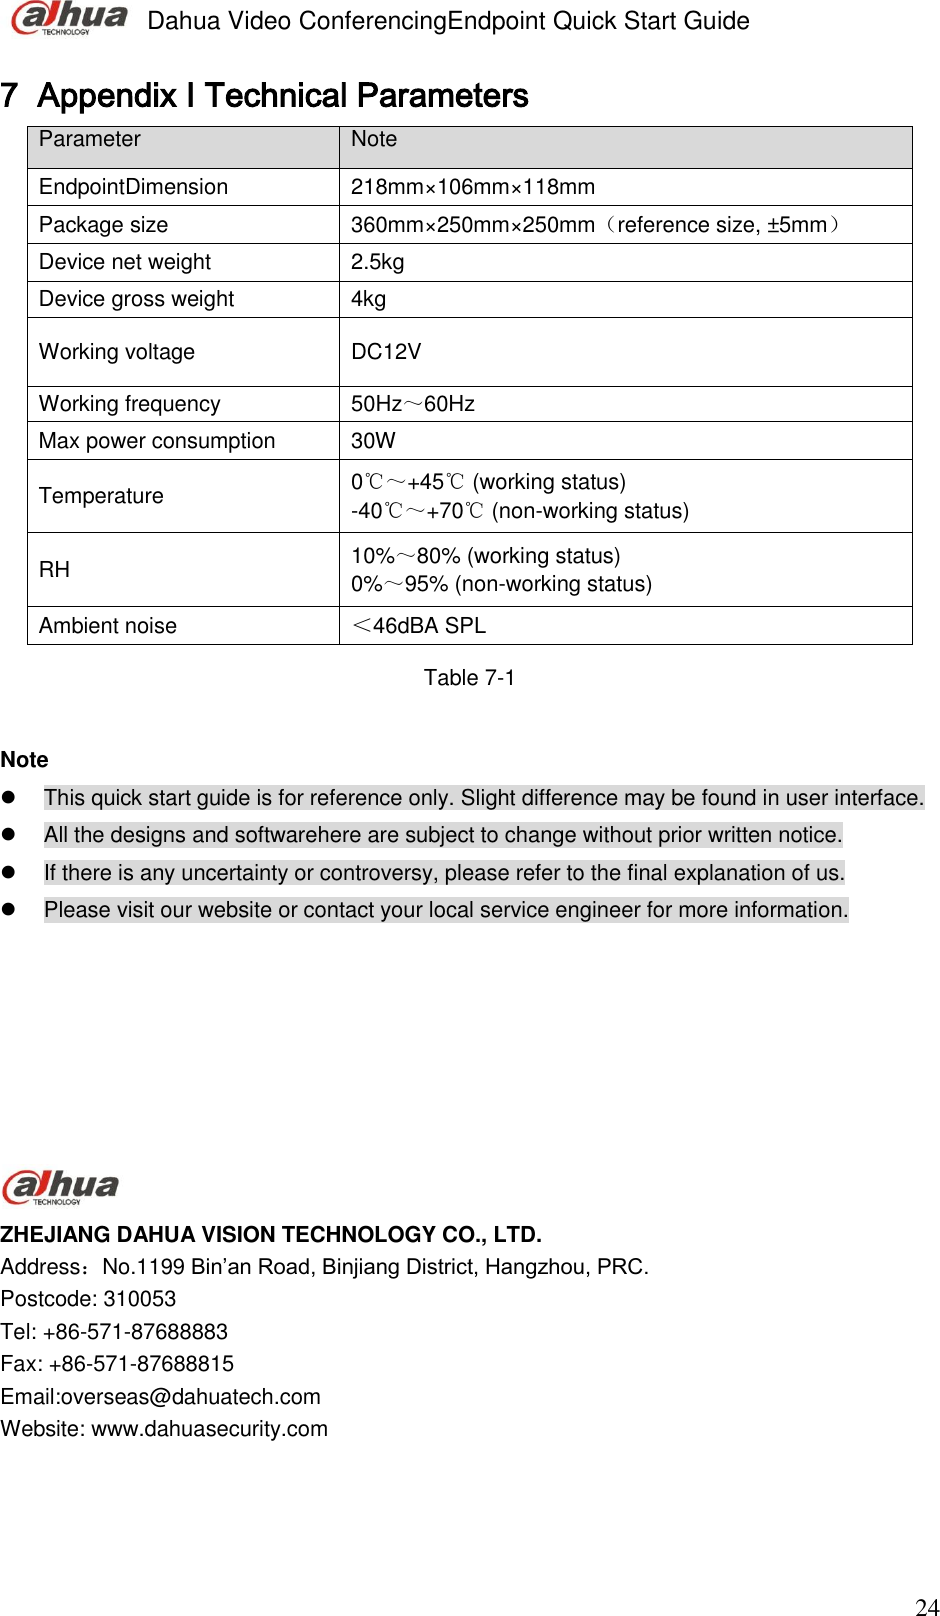 Page 33 of Zhejiang Dahua Vision Technology VCS-TS20A0 VIDEO CONFERENCING ENDPOINT User Manual